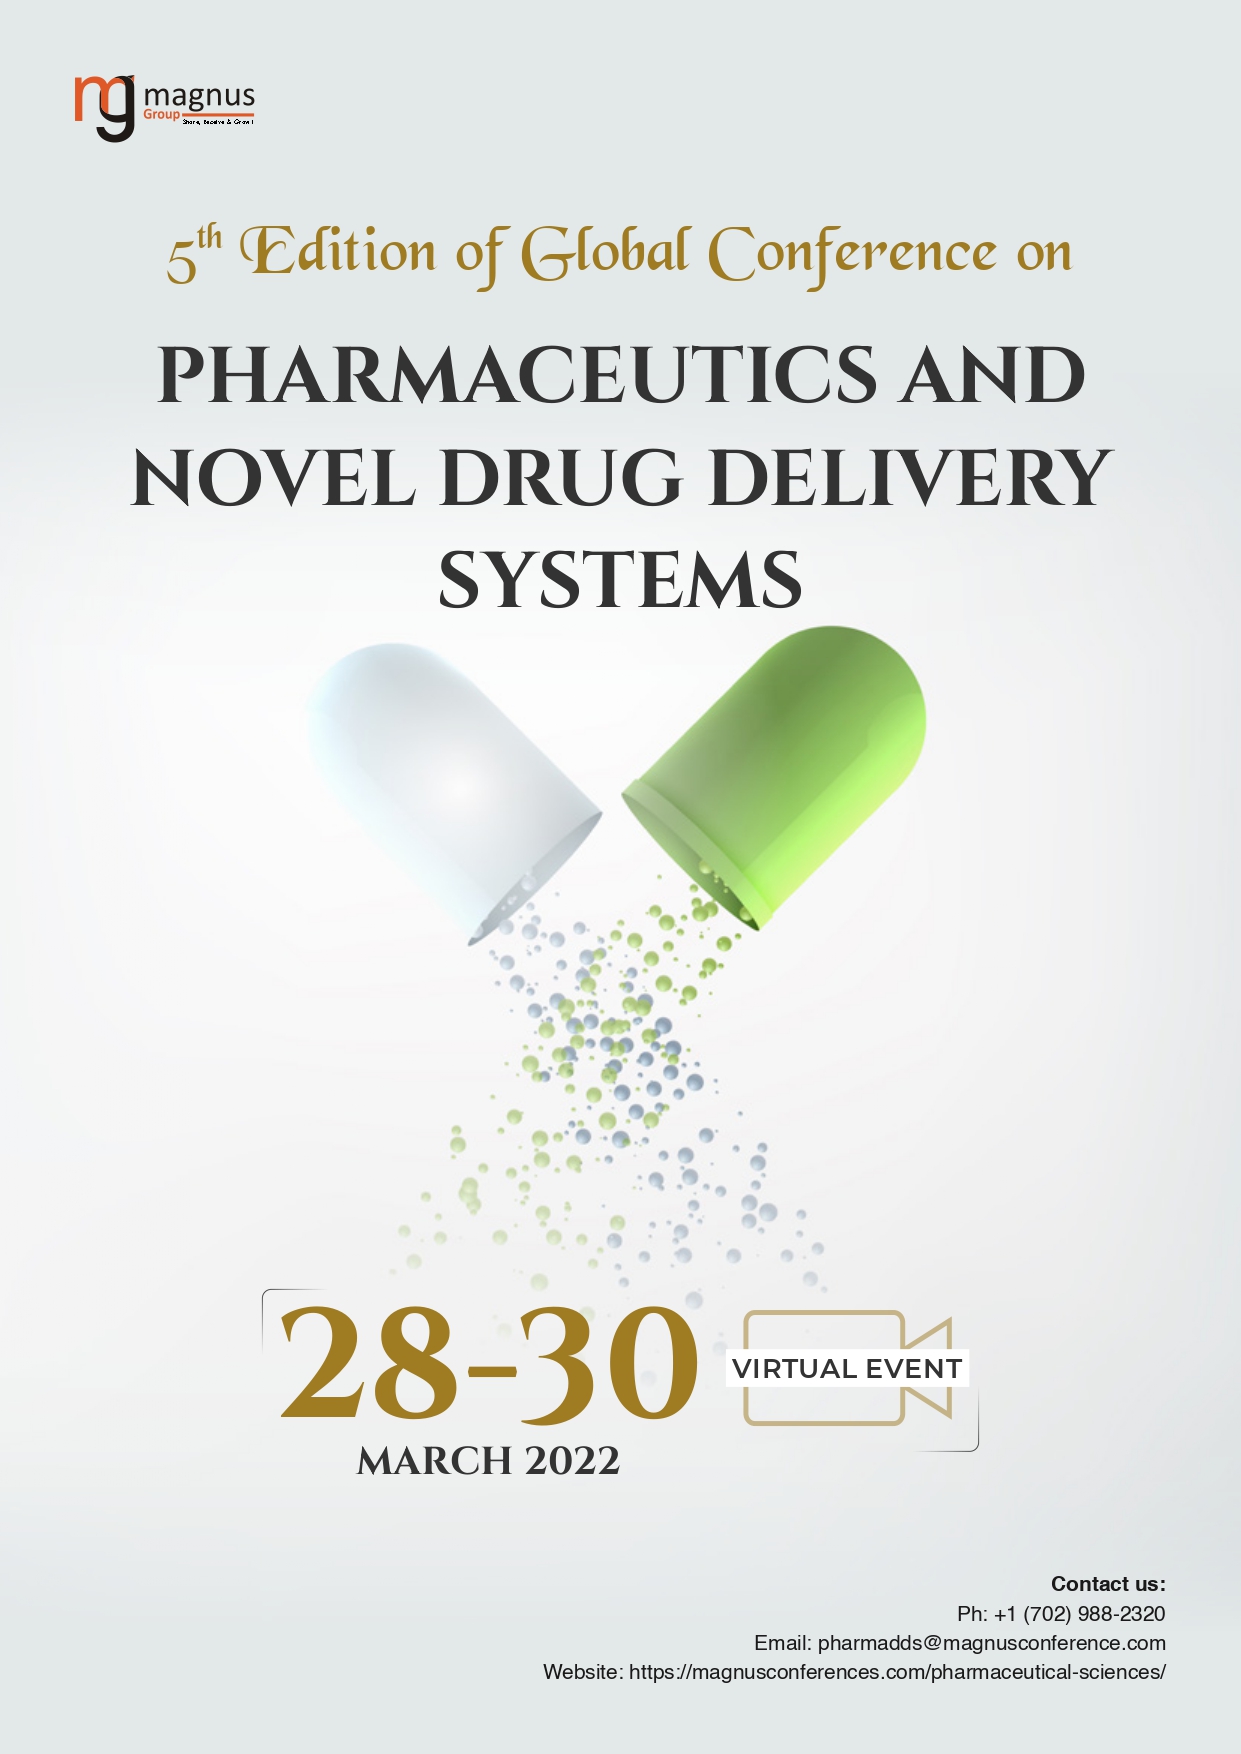 5th Edition of Global Conference on Pharmaceutics and Novel Drug Delivery Systems Program